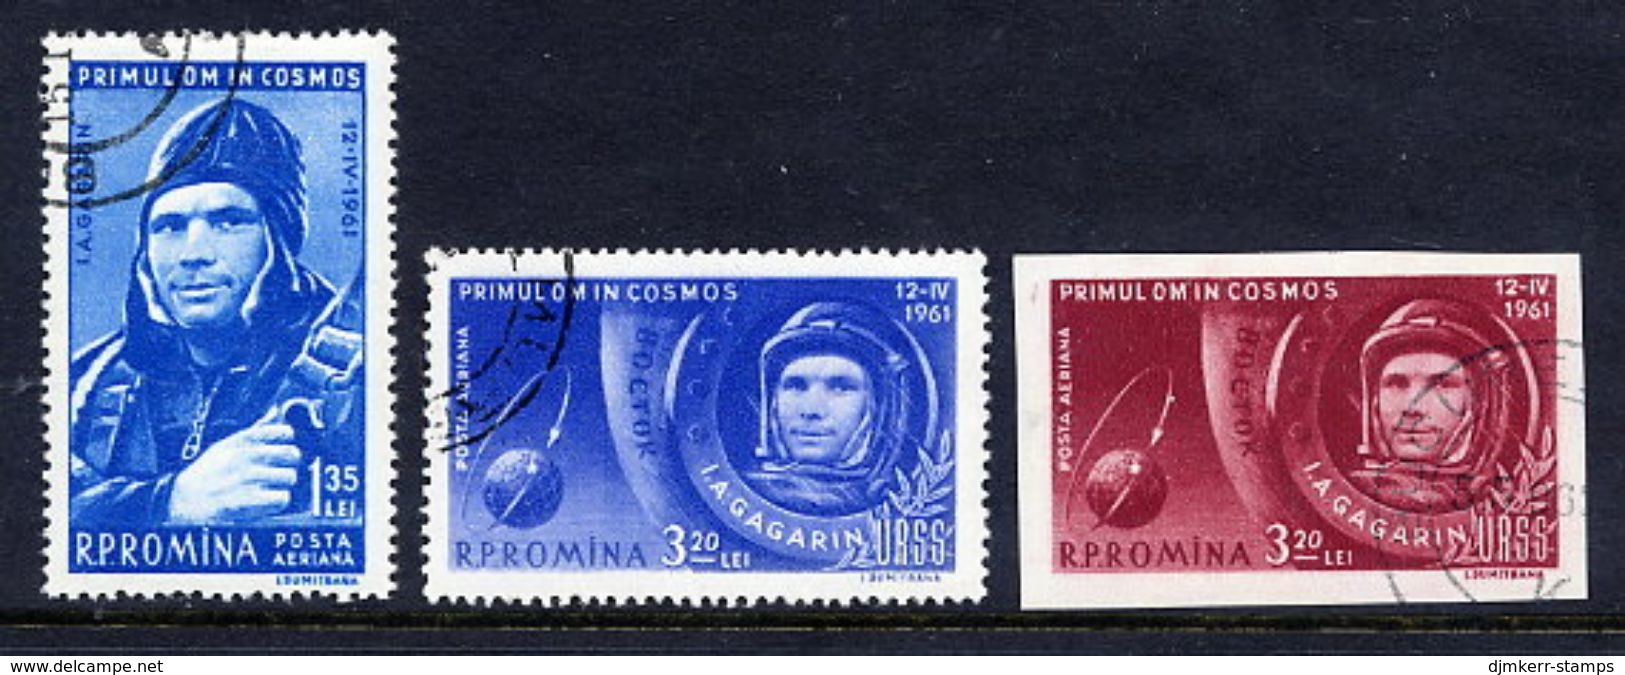 ROMANIA 1961 First Manned Space Flight  Used.  Michel 1962-64 - Used Stamps